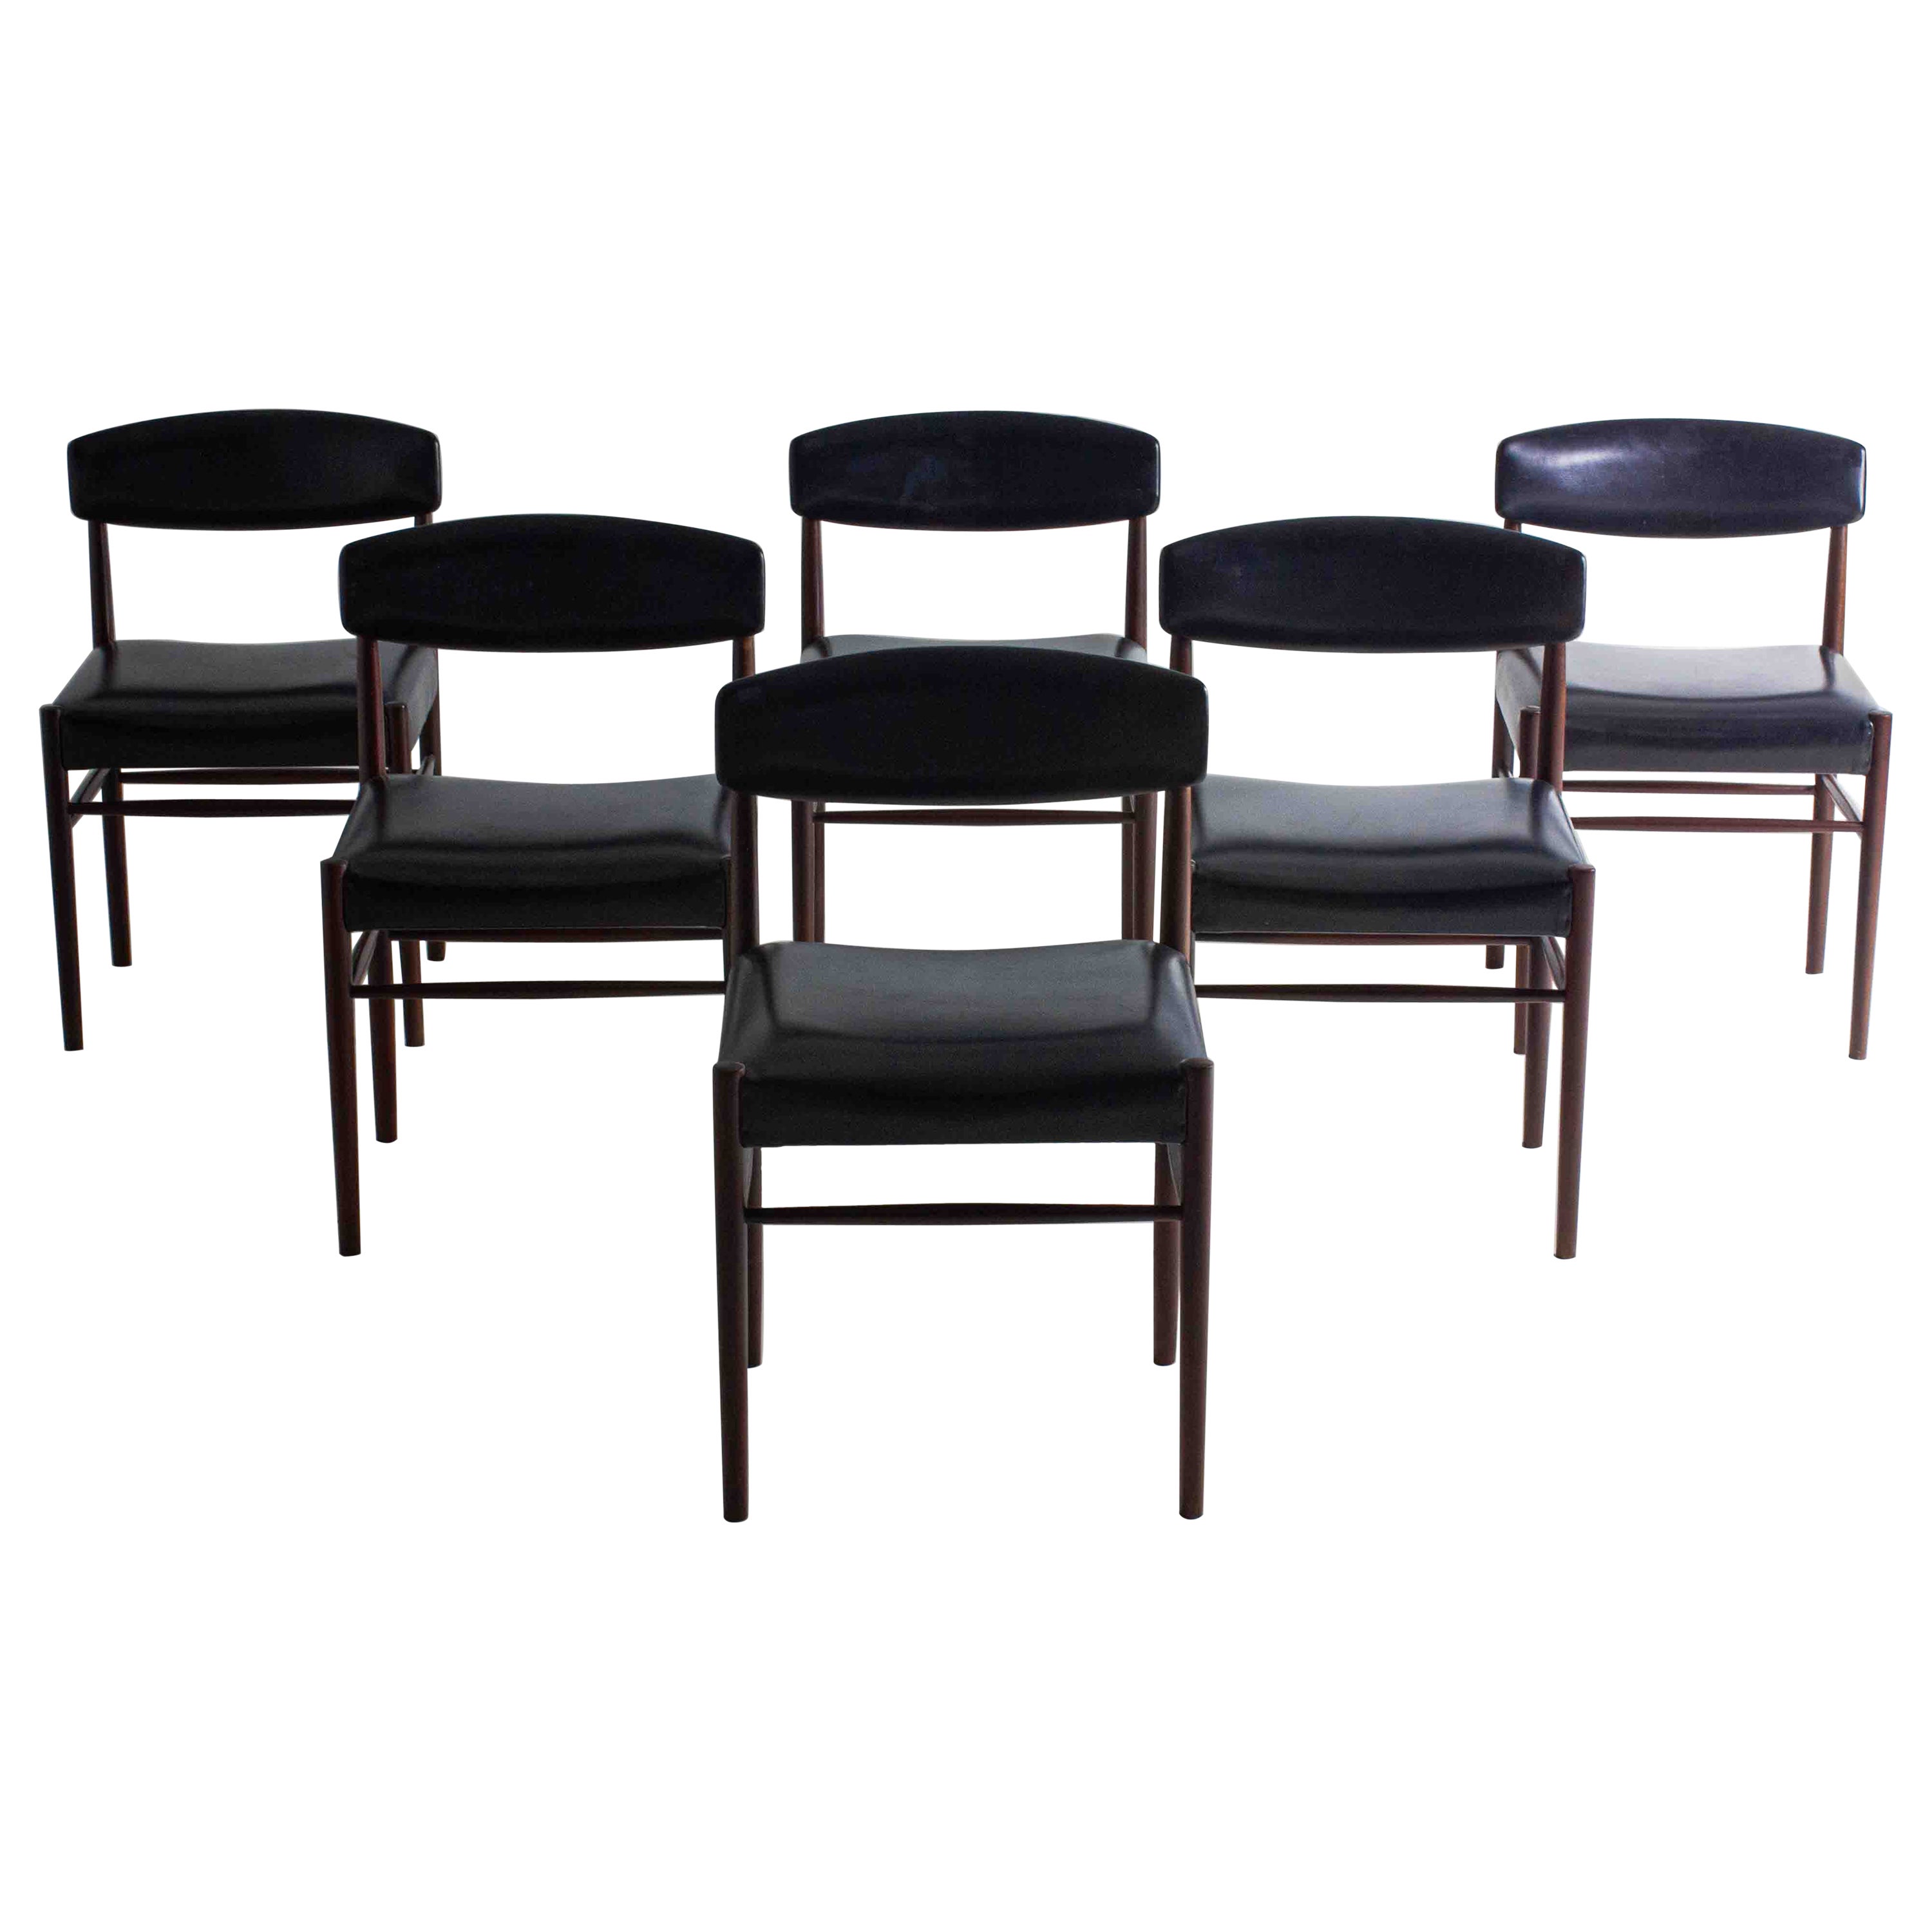 Mid-century dining chairs by Oswald Vermaercke for V-form, Belgium 1960s For Sale